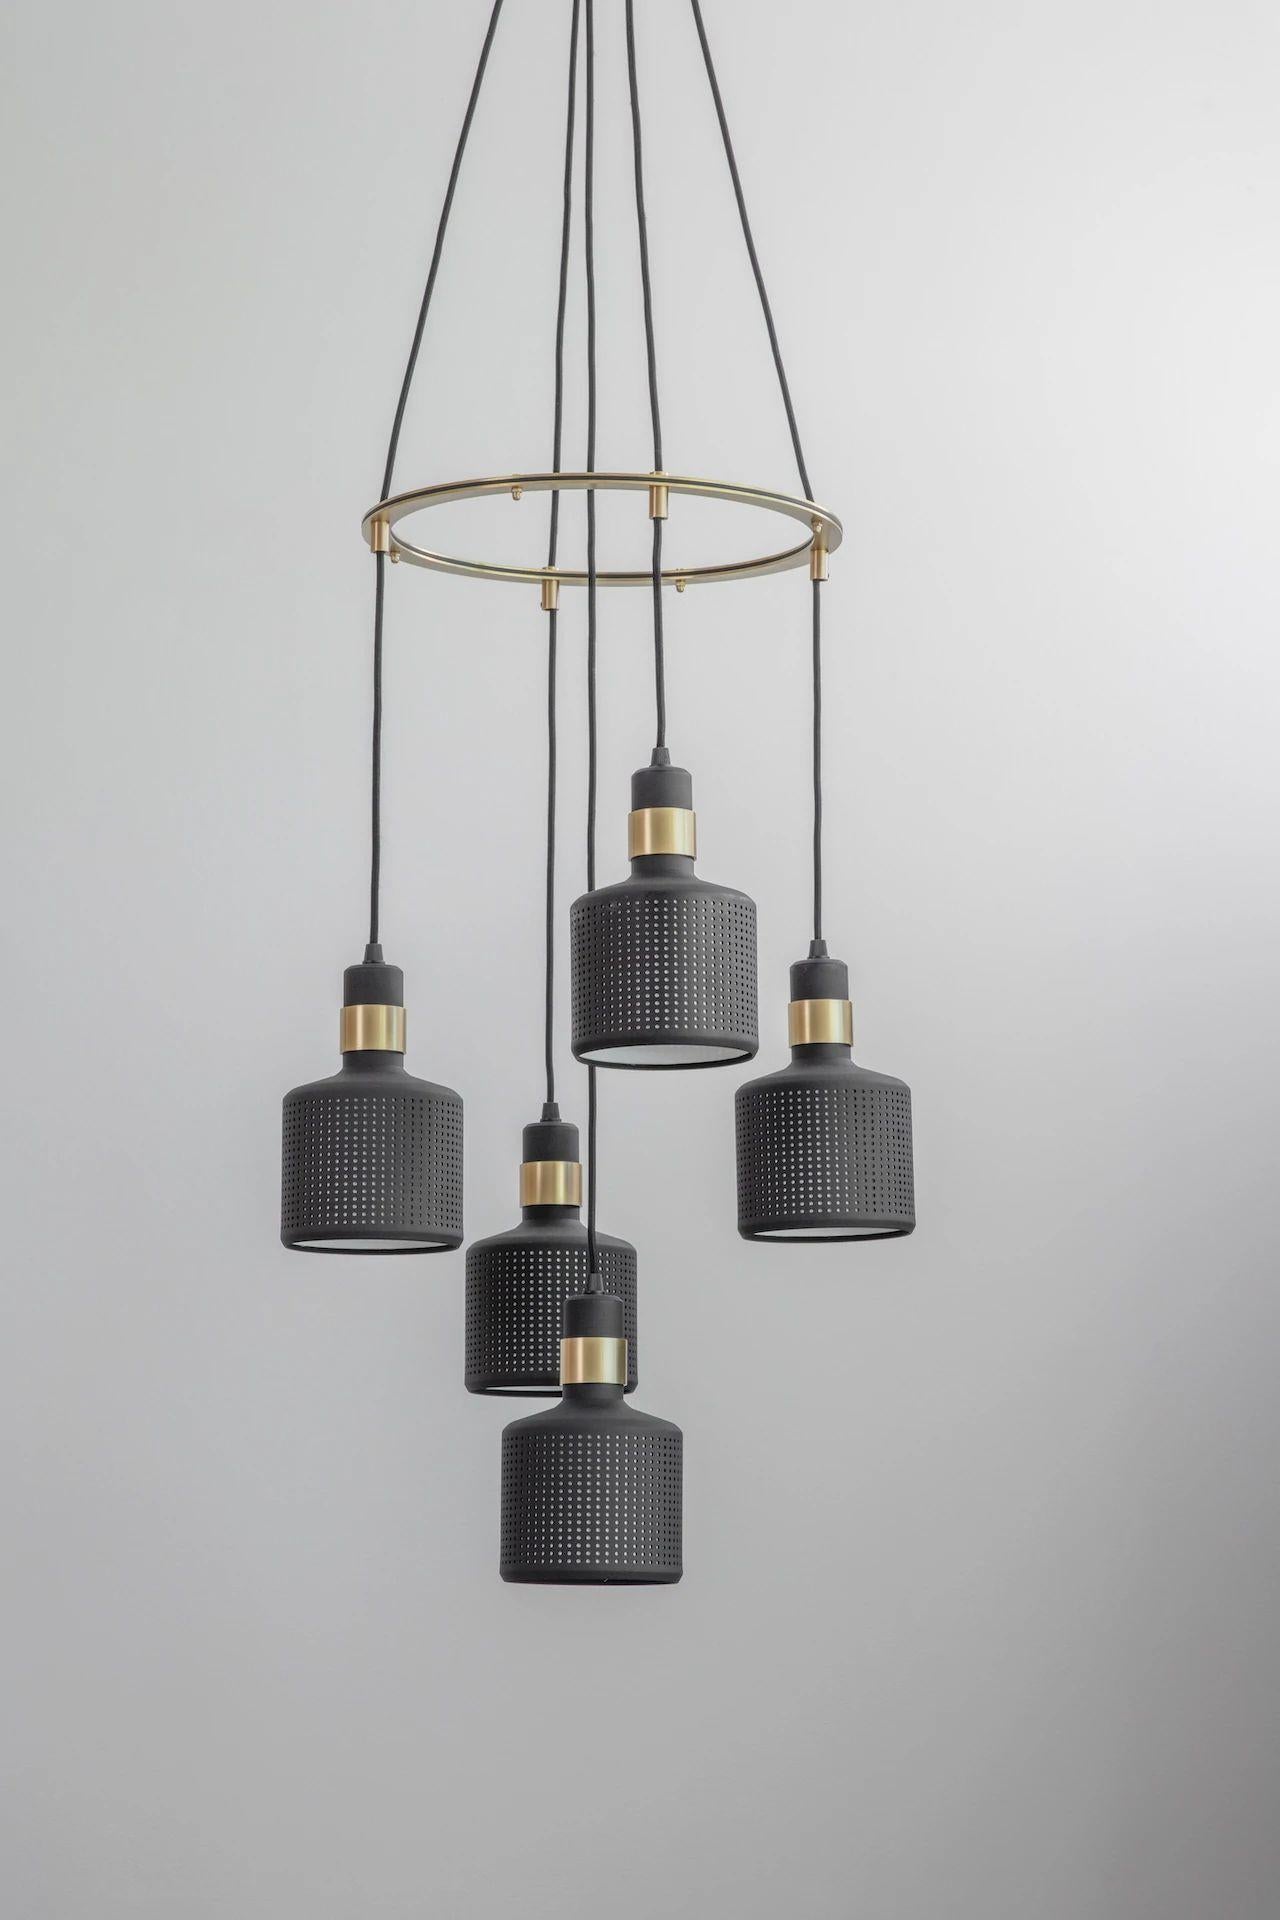 Black riddle cluster light 5 by Bert Frank.
Dimensions: H 20 x W 12 x D 12 cm each lamp.
Materials: brass and steel.

Available finishes: brass and black.
All our lamps can be wired according to each country. If sold to the USA it will be wired